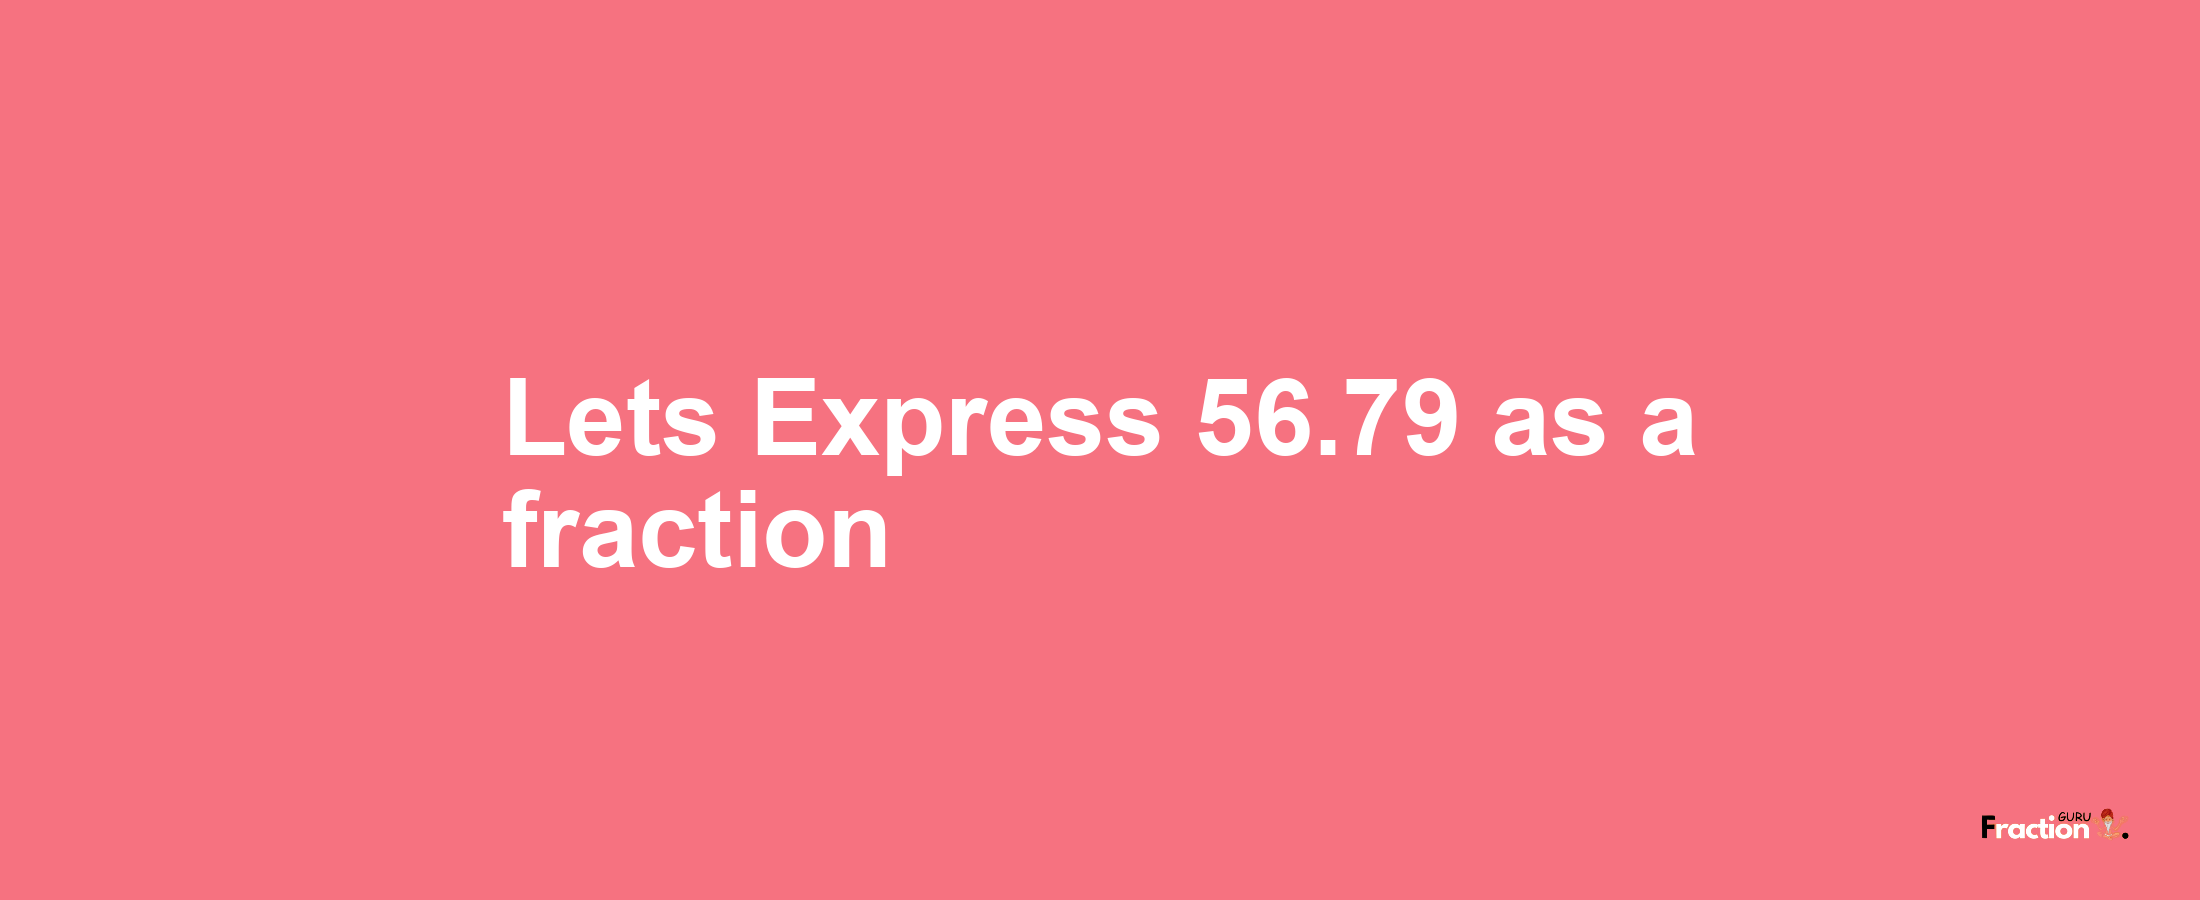 Lets Express 56.79 as afraction